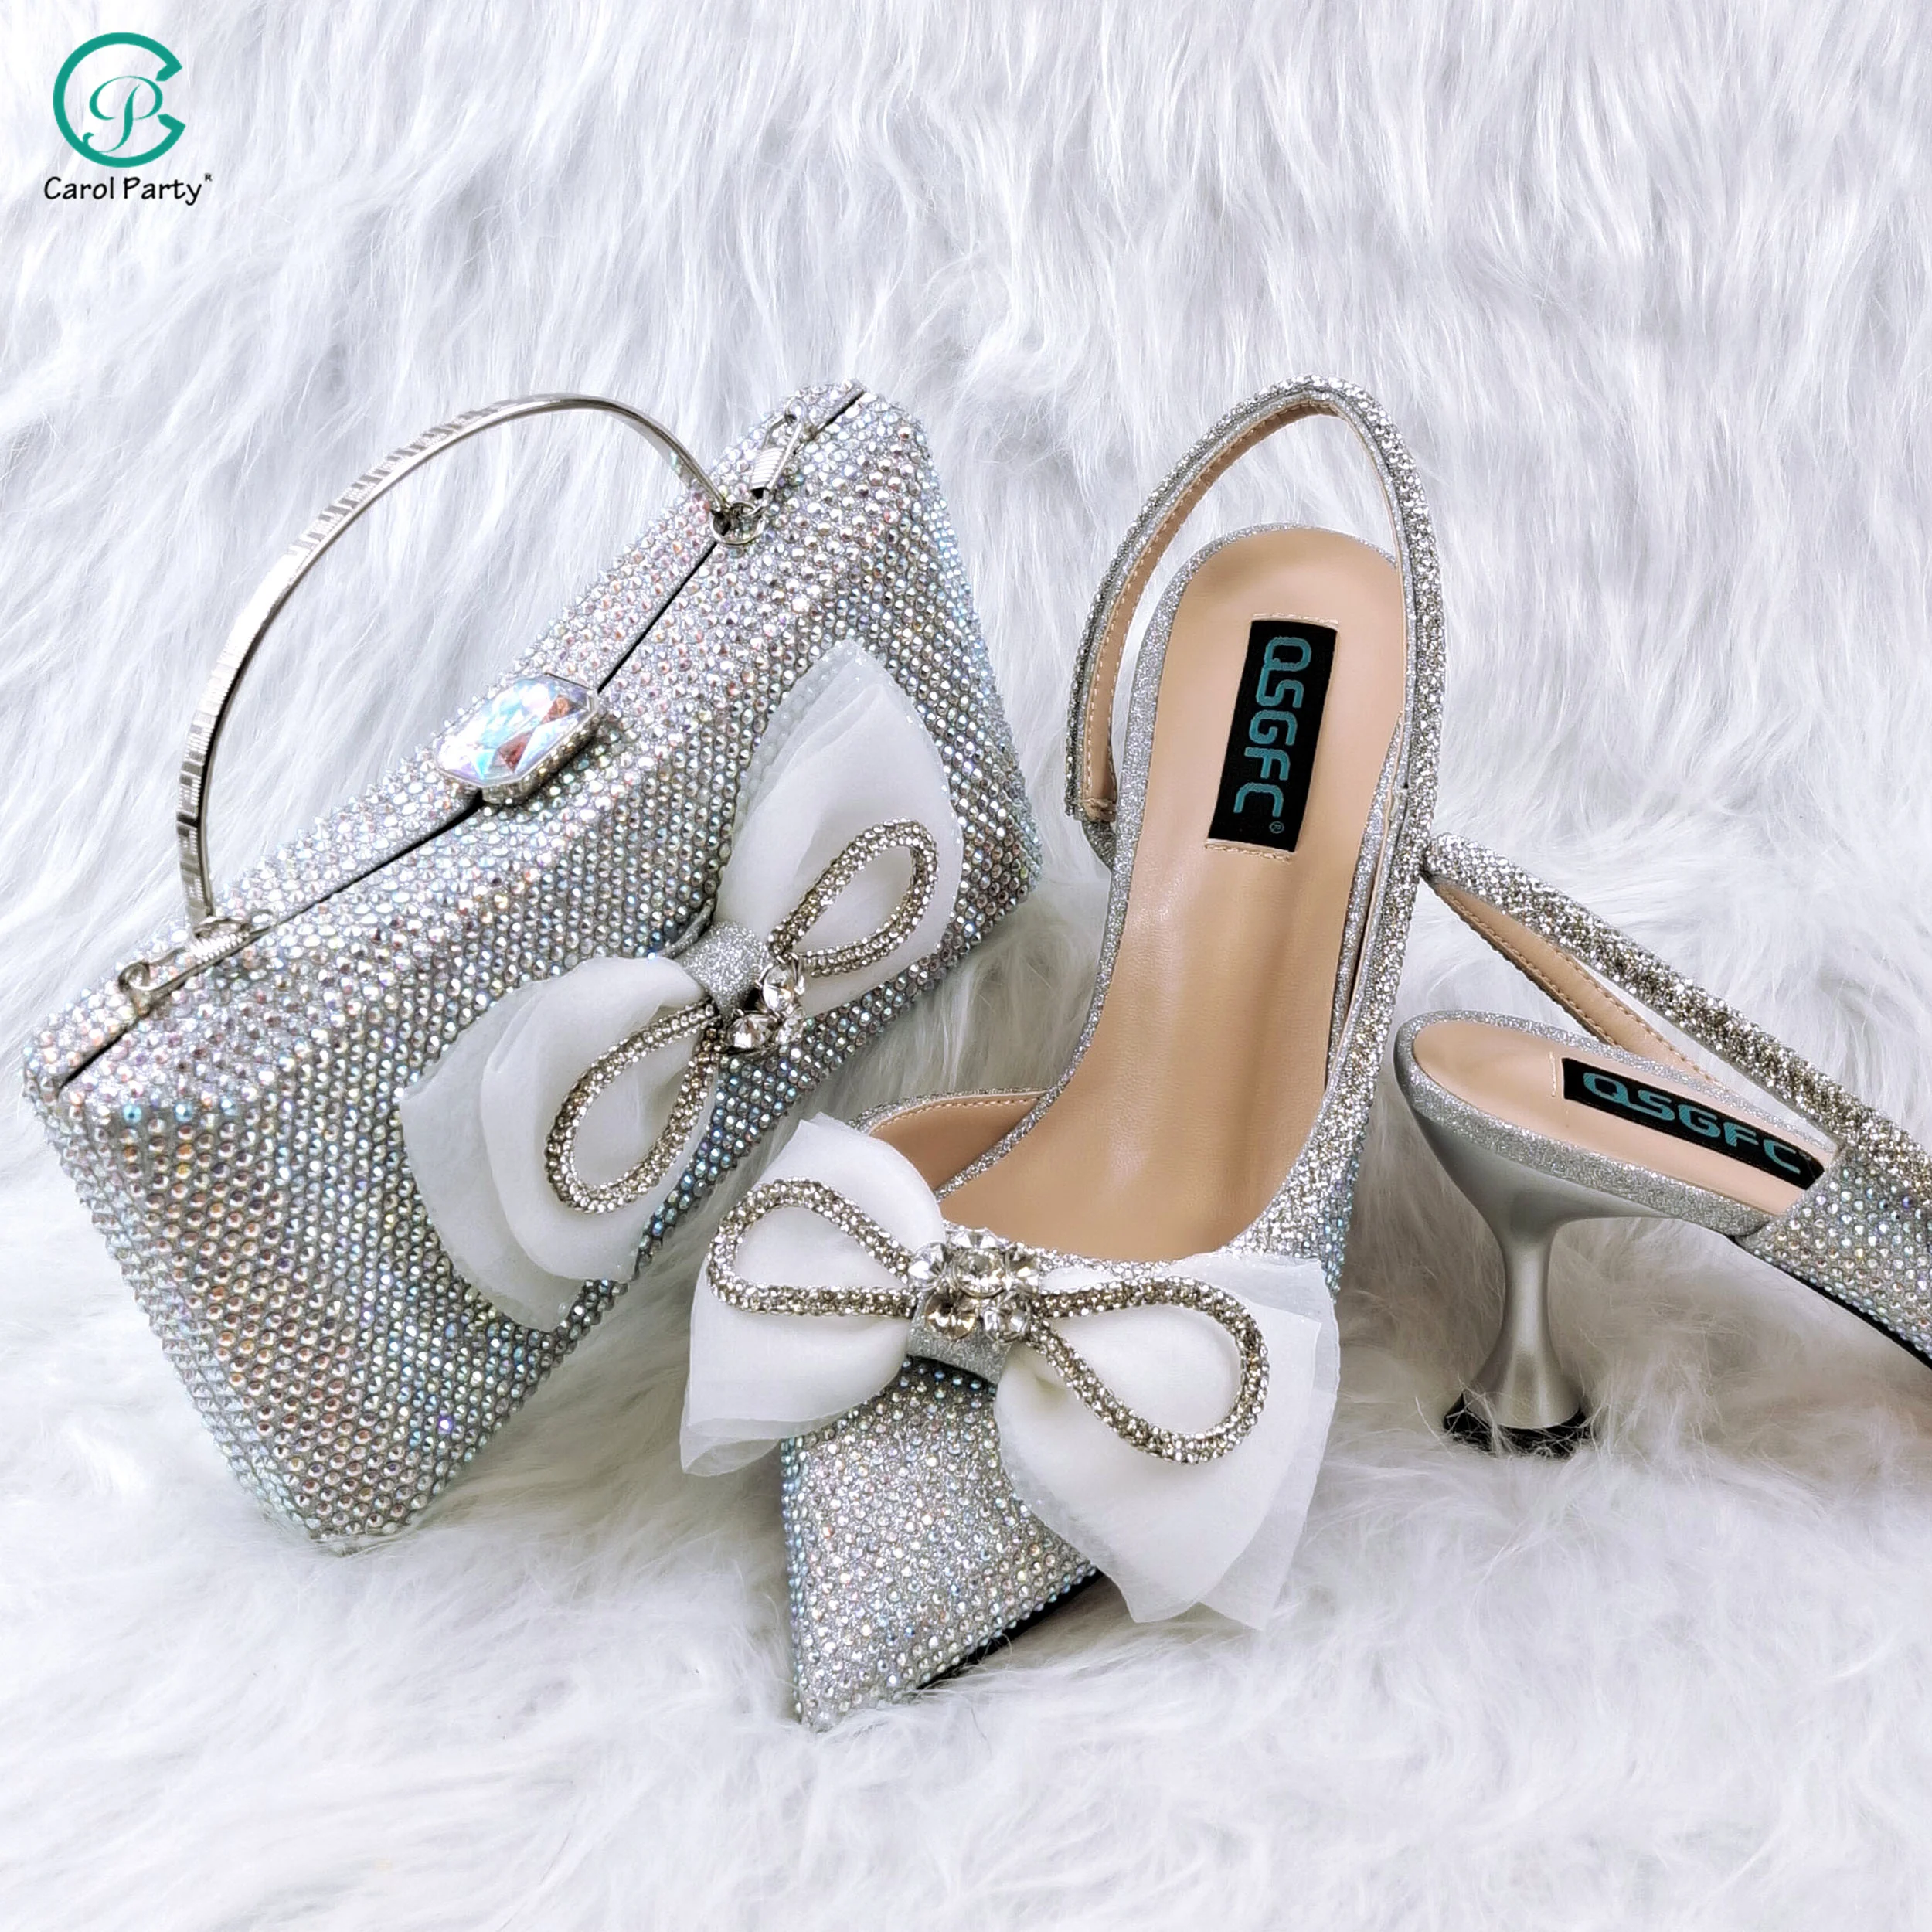 Carol Party Silver Color Women's Shoes And Bags With tulle Large Butterfly  Design Shiny Diamonds Women's Party Shoes And Bags